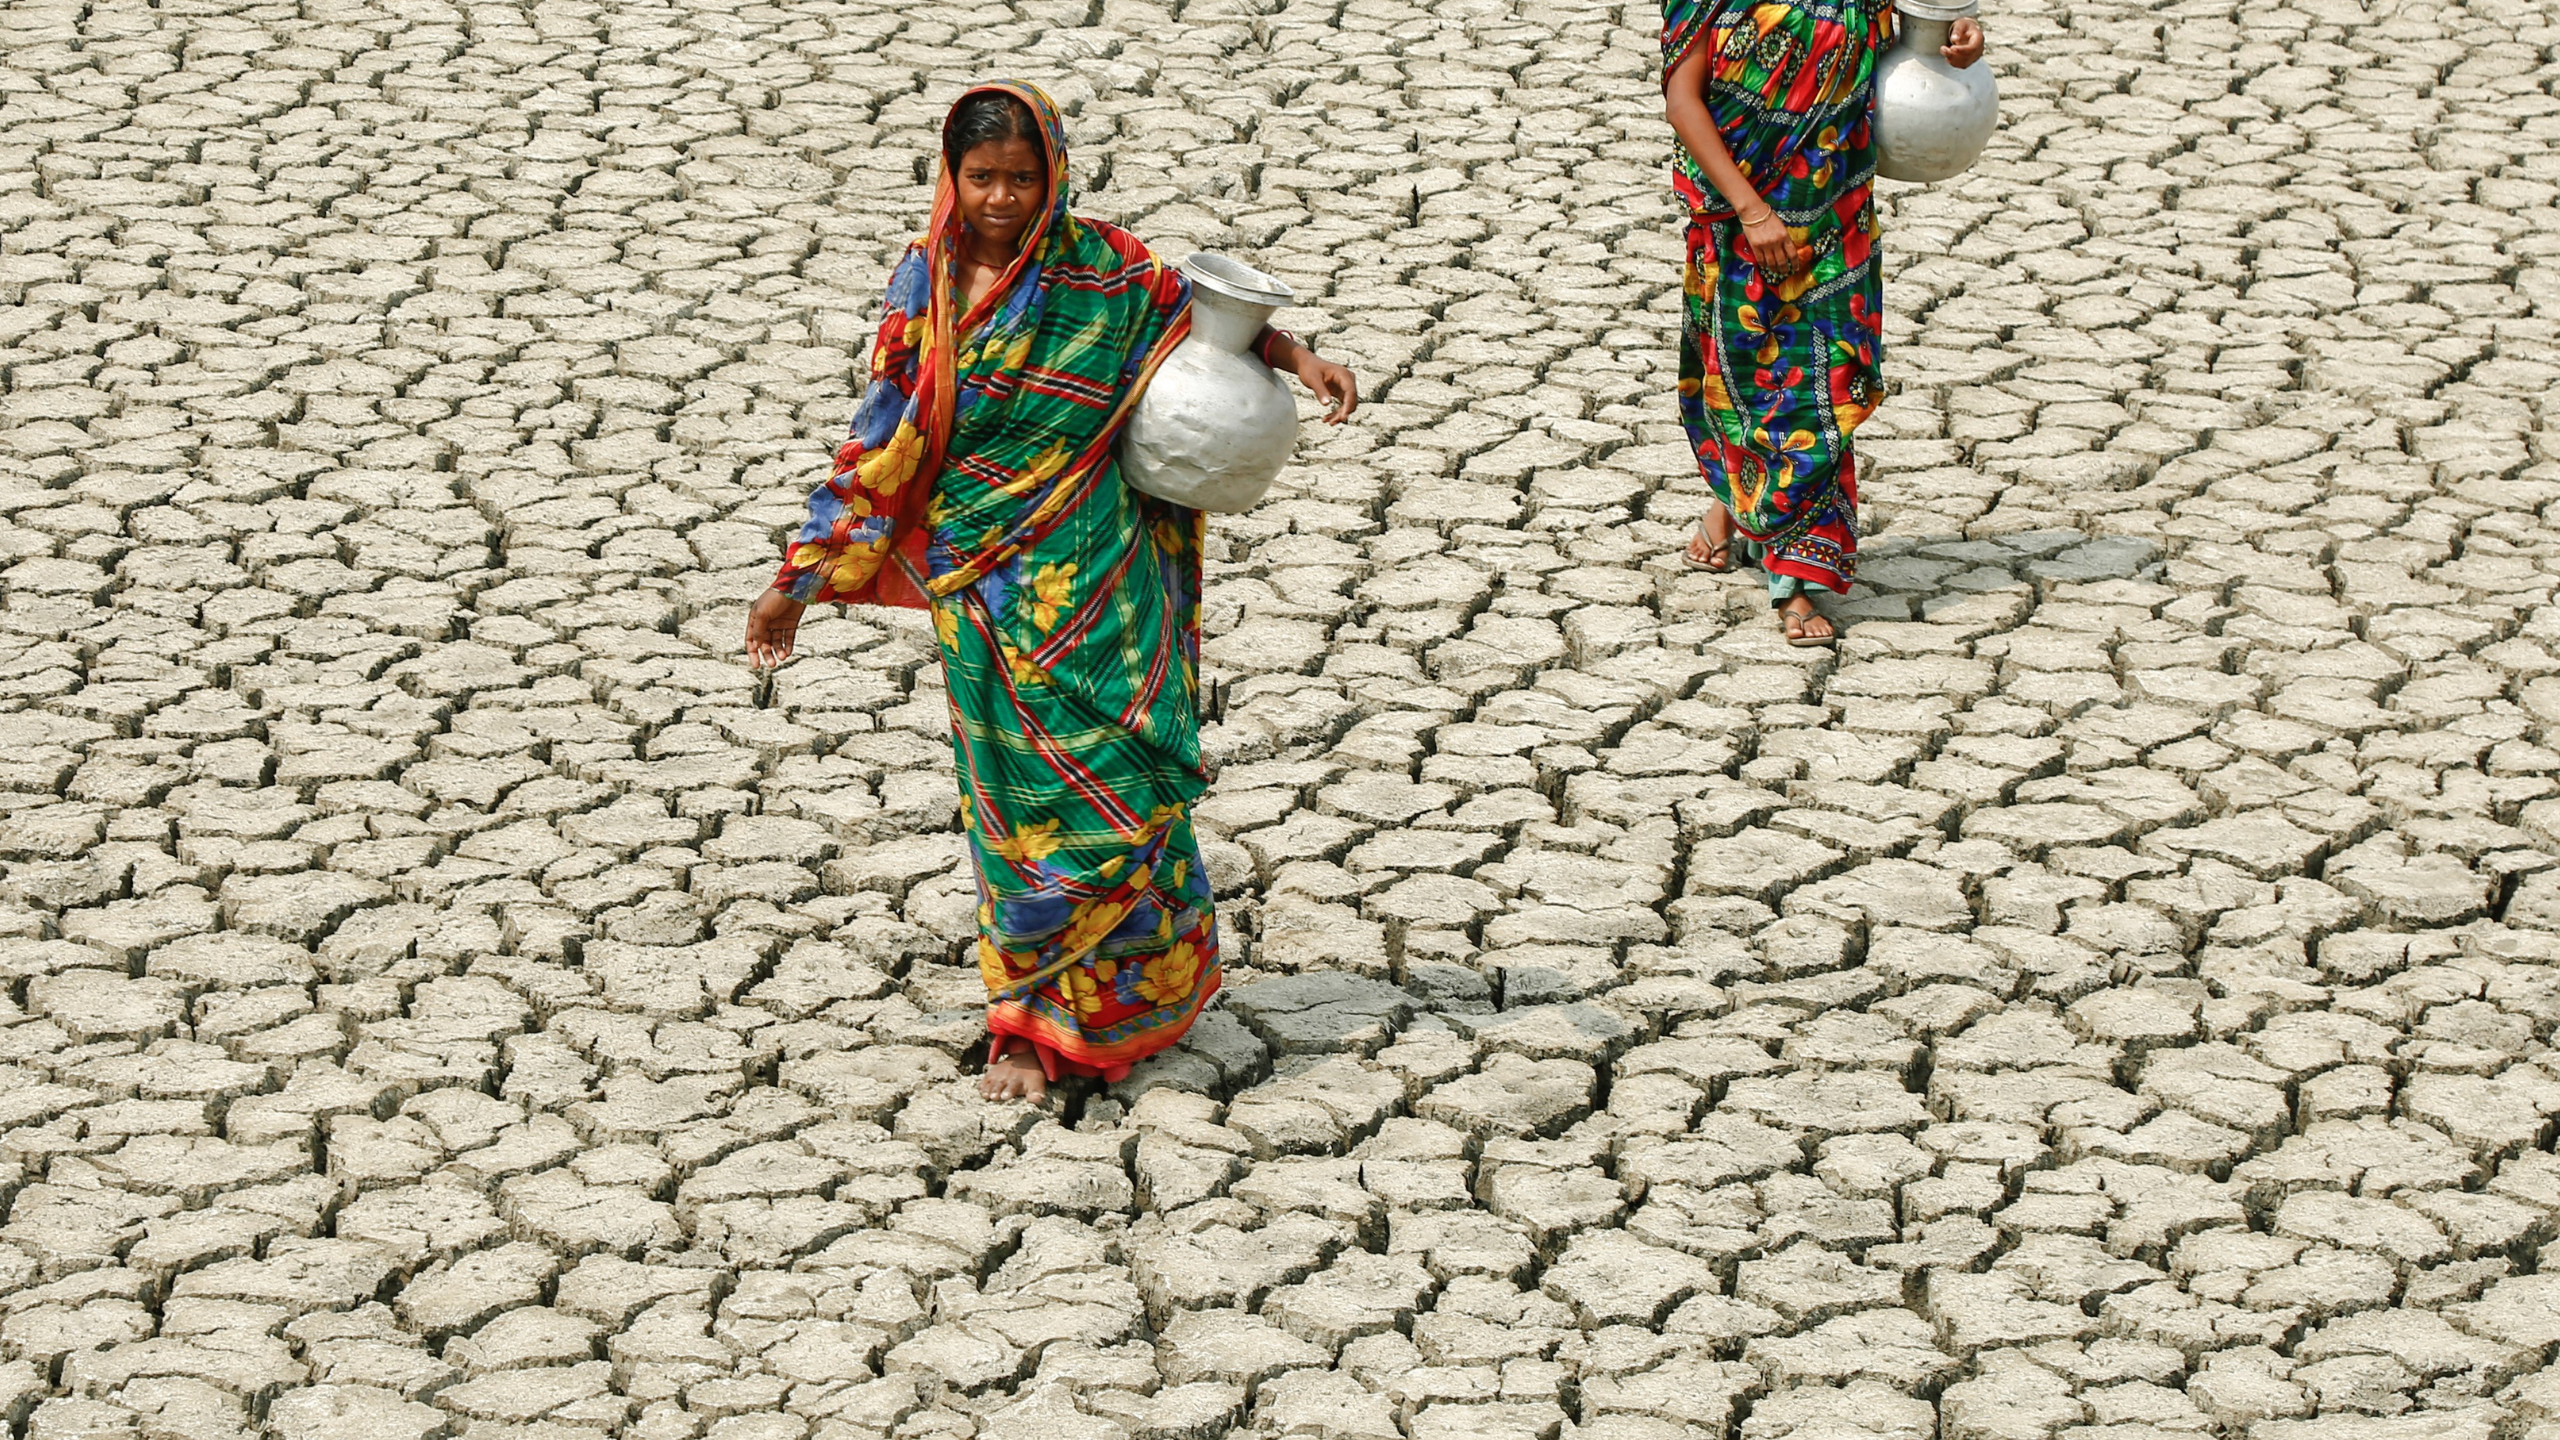 Two women, holding water jugs, walking across extremely dry, cracked earth. 